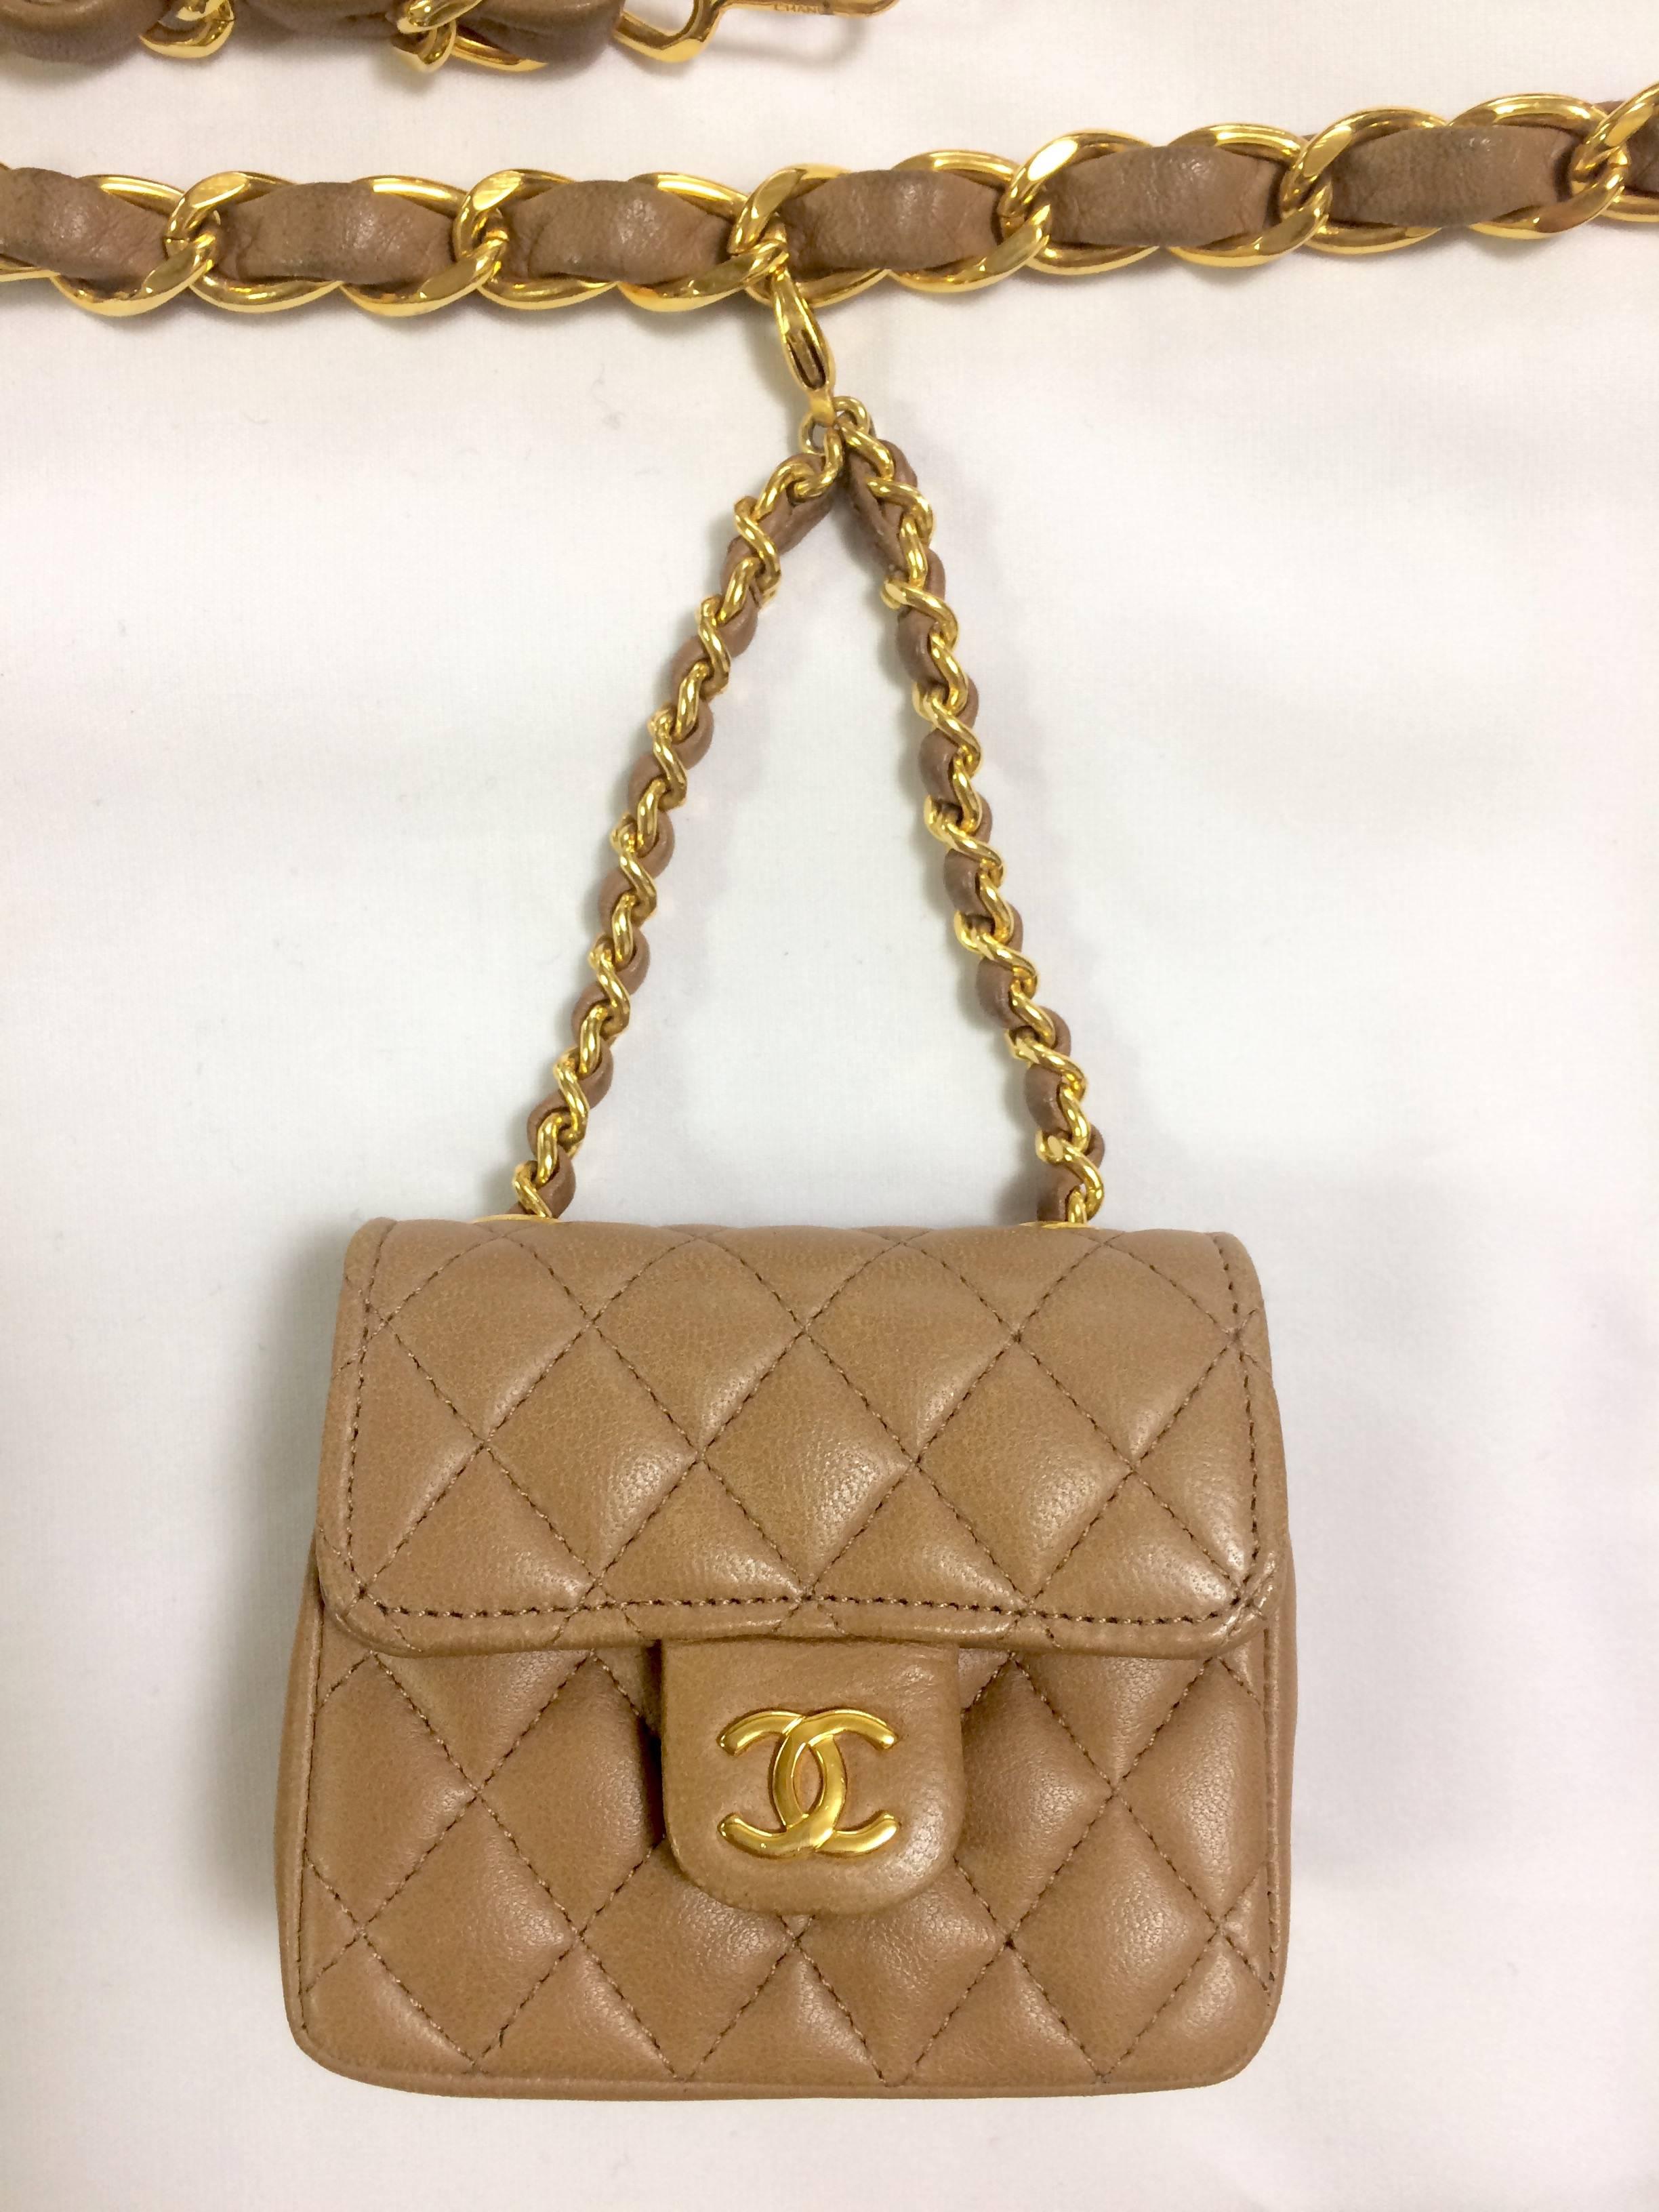 1990s. Vintage CHANEL brown lambskin mini 2.55 bag charm chain leather belt with golden CC charm. Must have.

Here is another fabulous piece from CHANEL back in the era of 80's - 90's, a brown leather golden chain belt with its iconic mini 2.55 bag